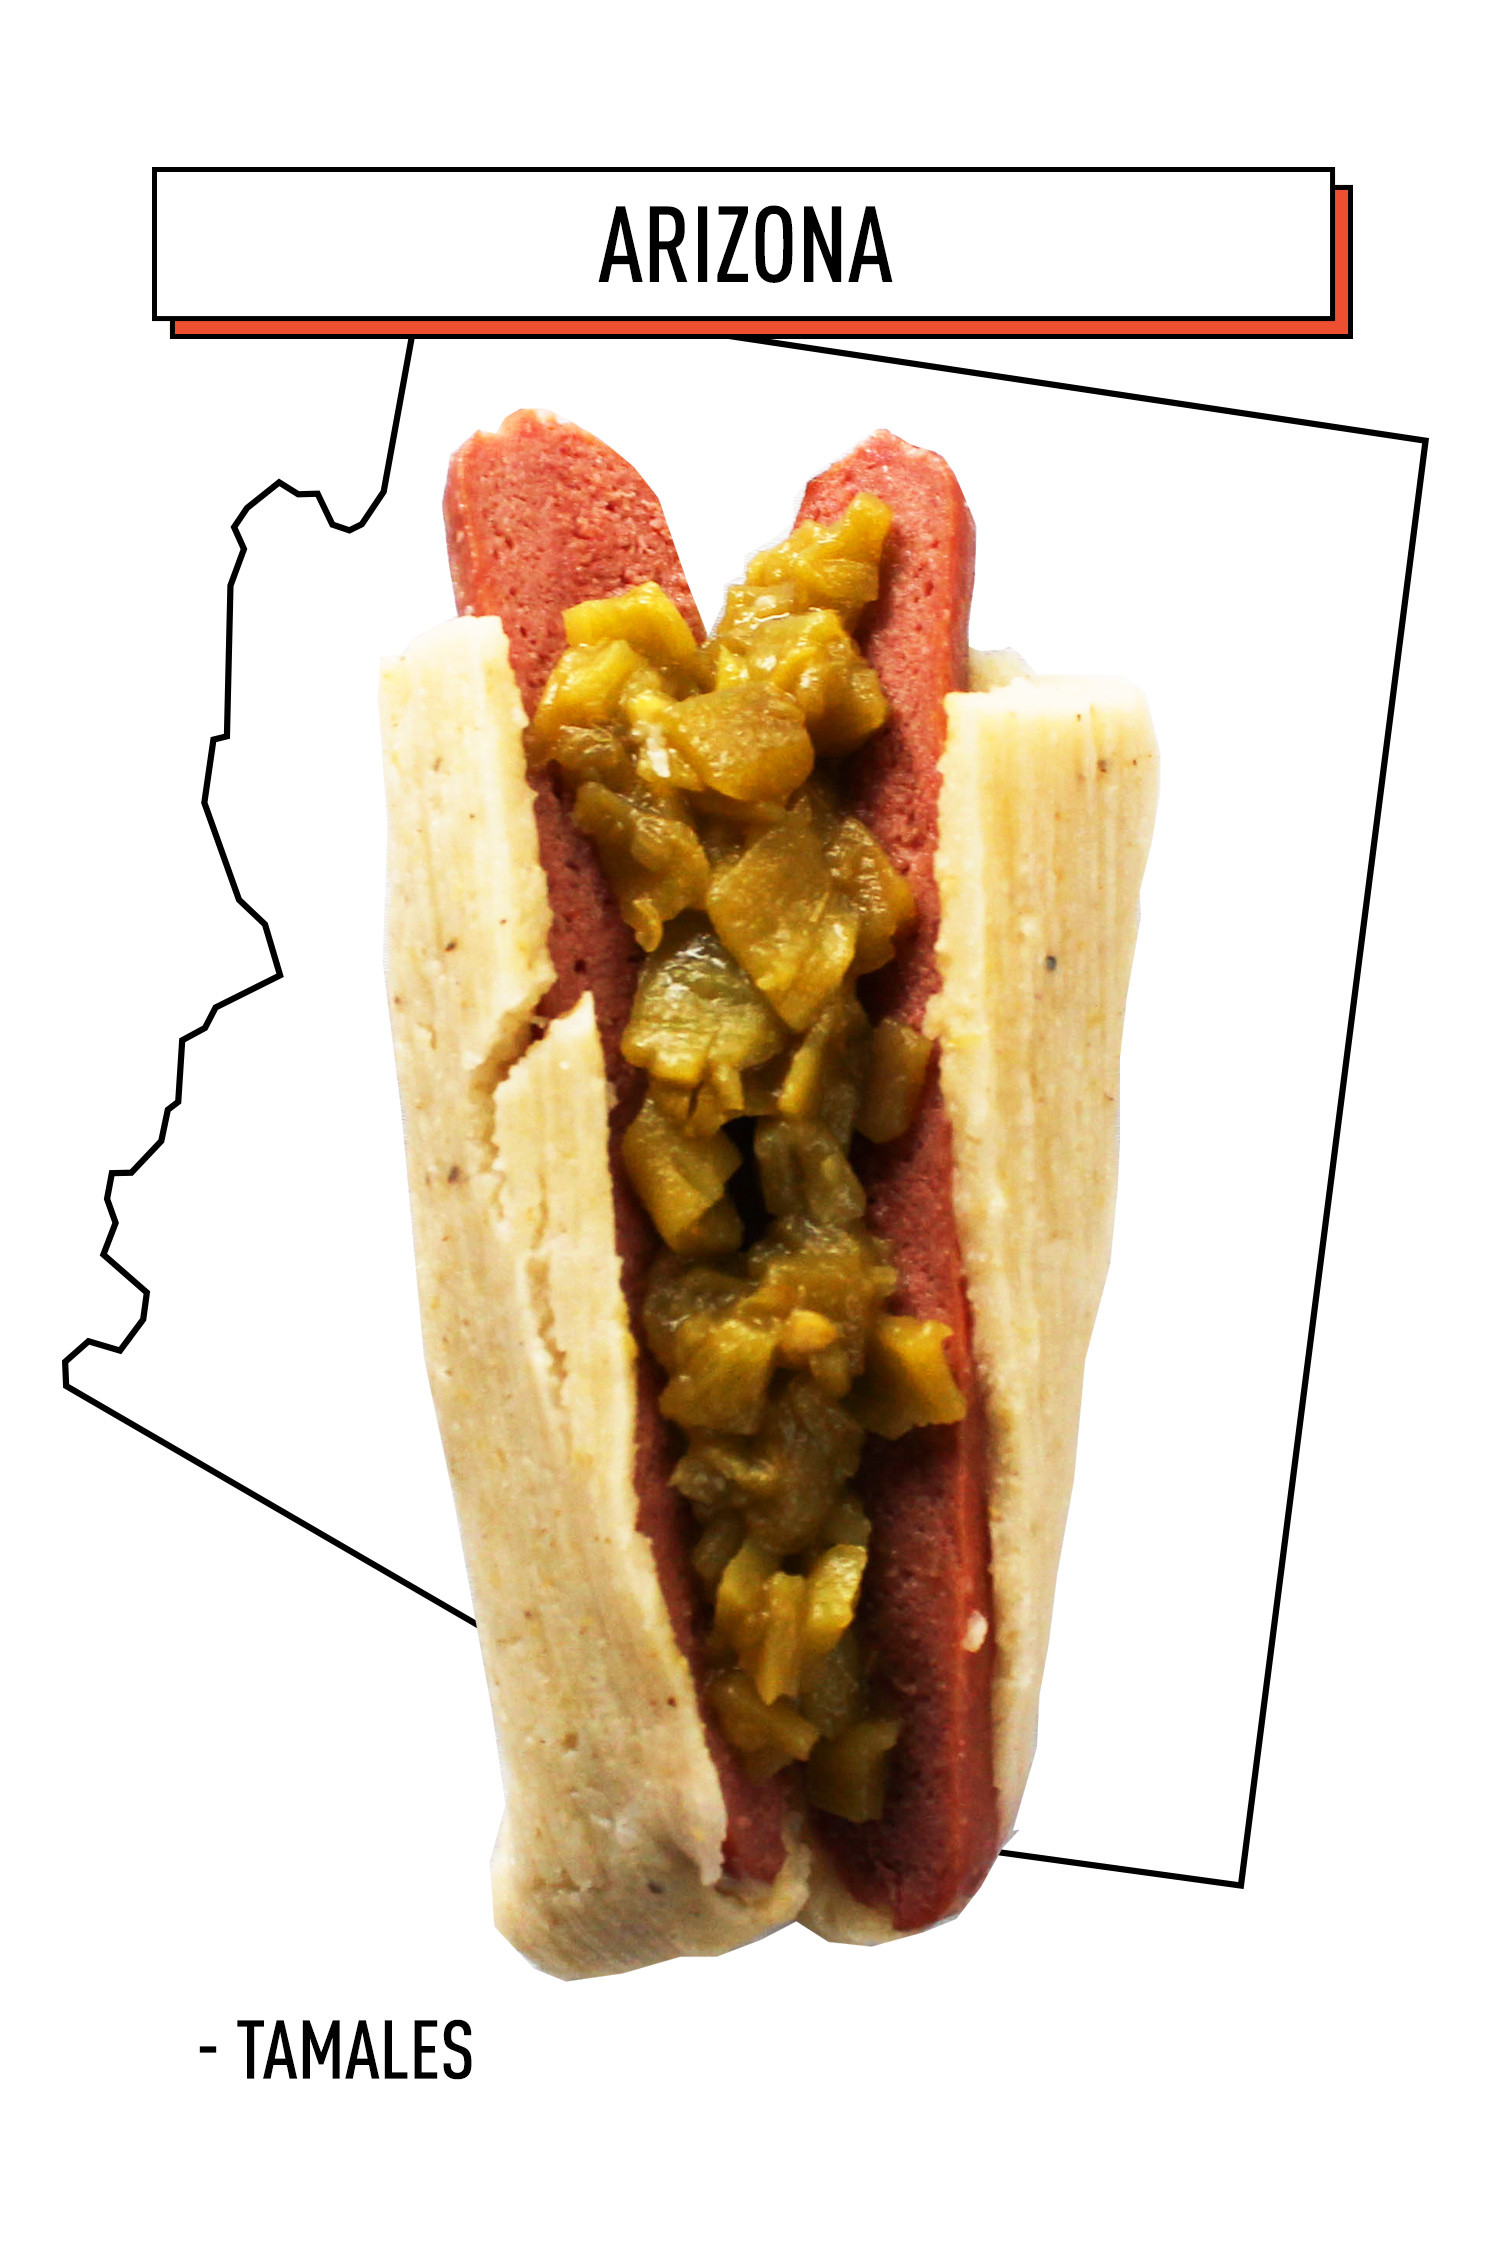 Hot Dogs Condiments
 Best Hot Dog Toppings & Condiments Gourmet Ideas for